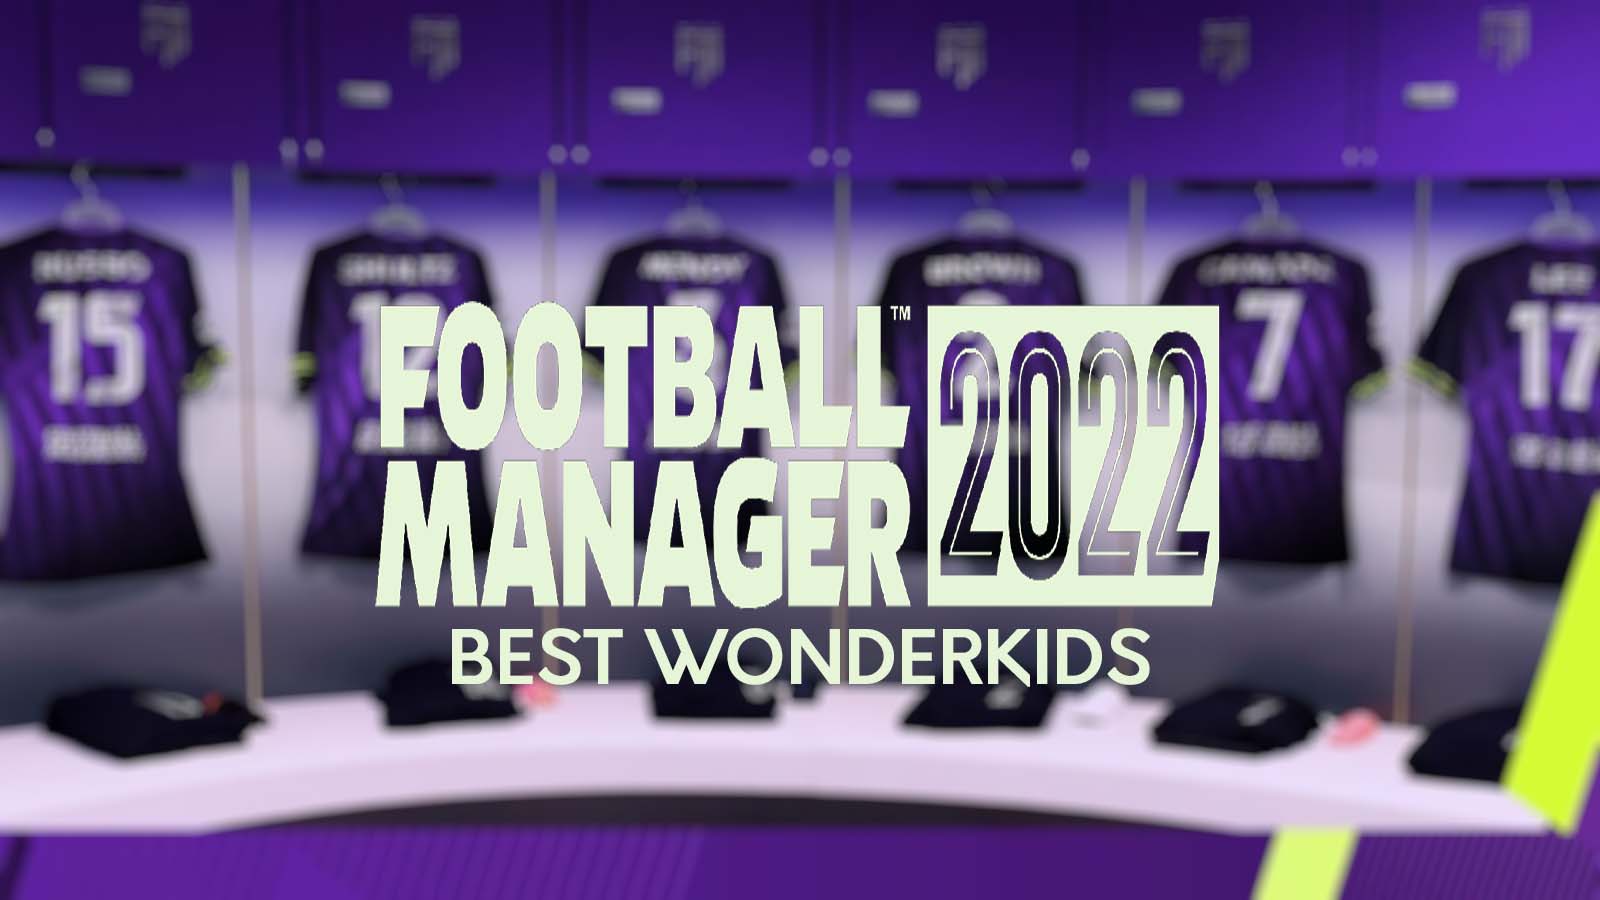 The Best Wonderkids to sign in Football Manager 2022 - KeenGamer